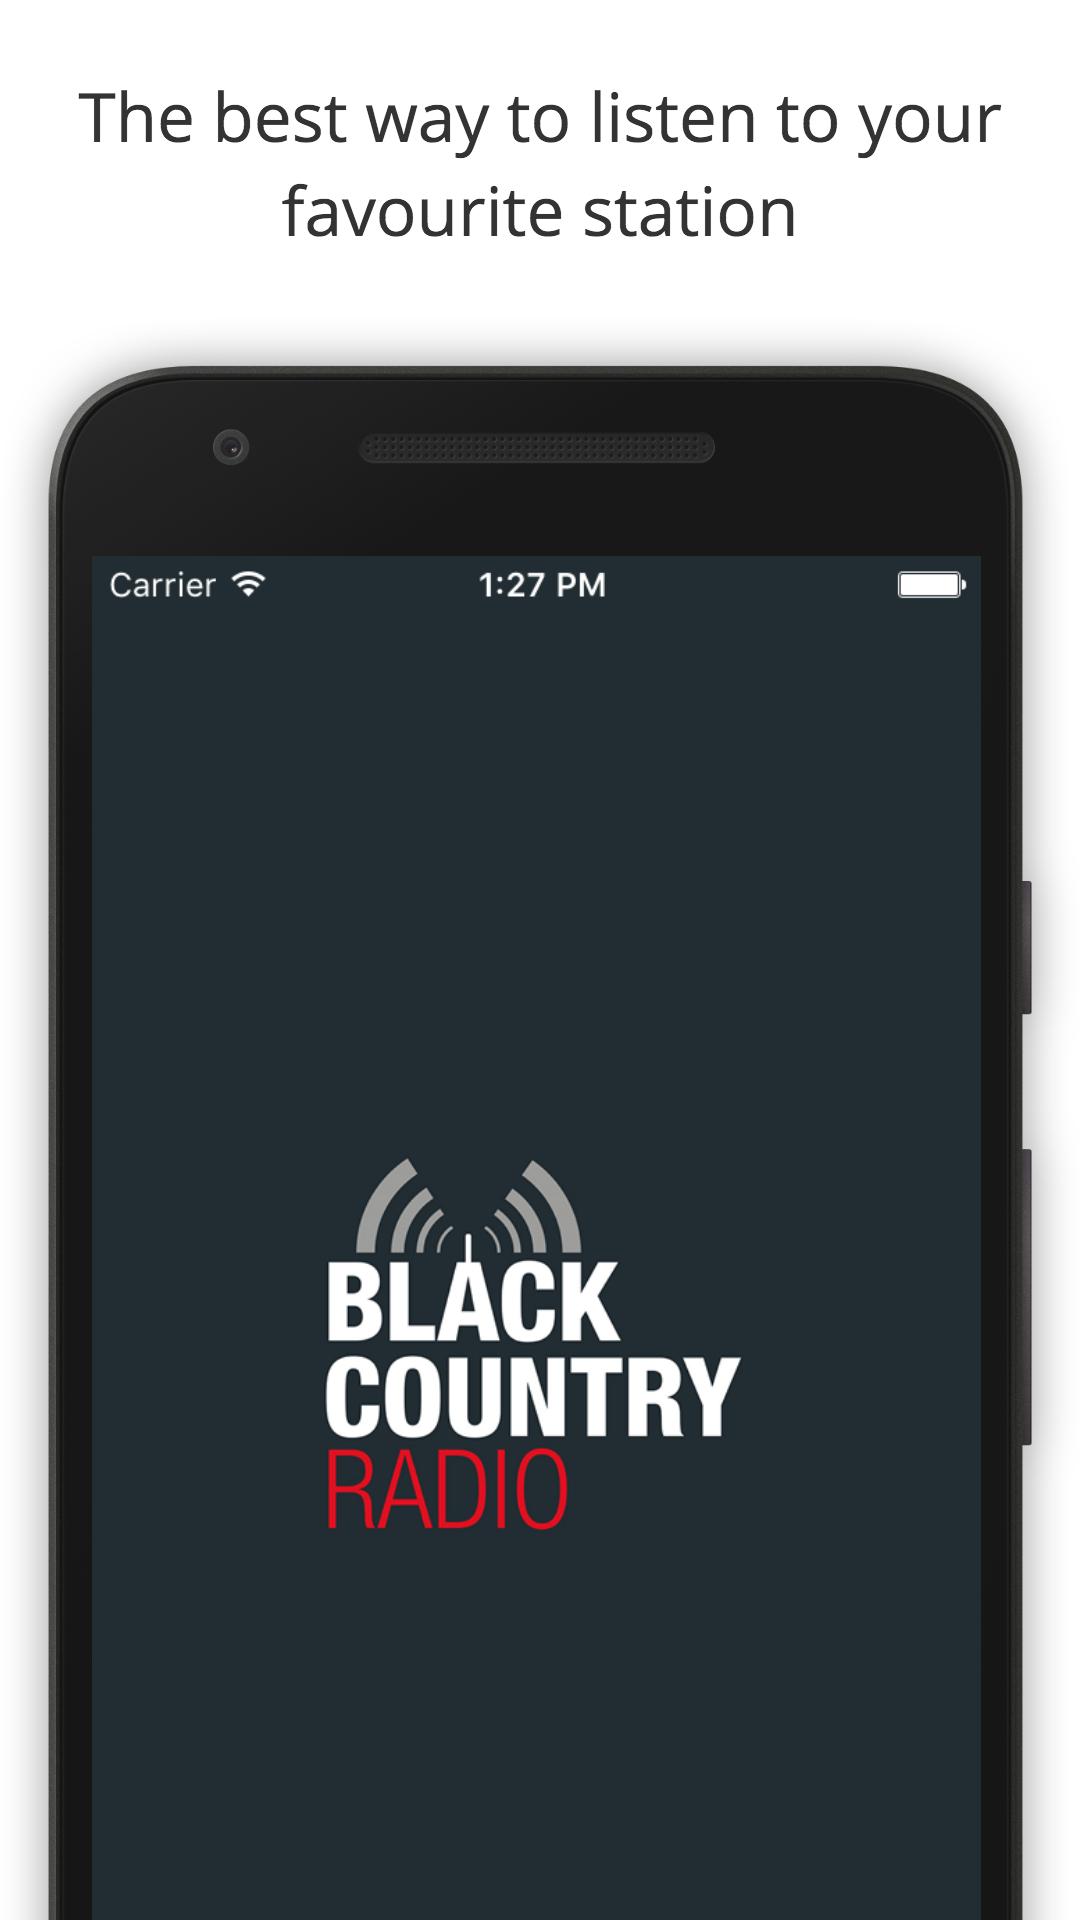 Black Country Radio for Android - APK Download